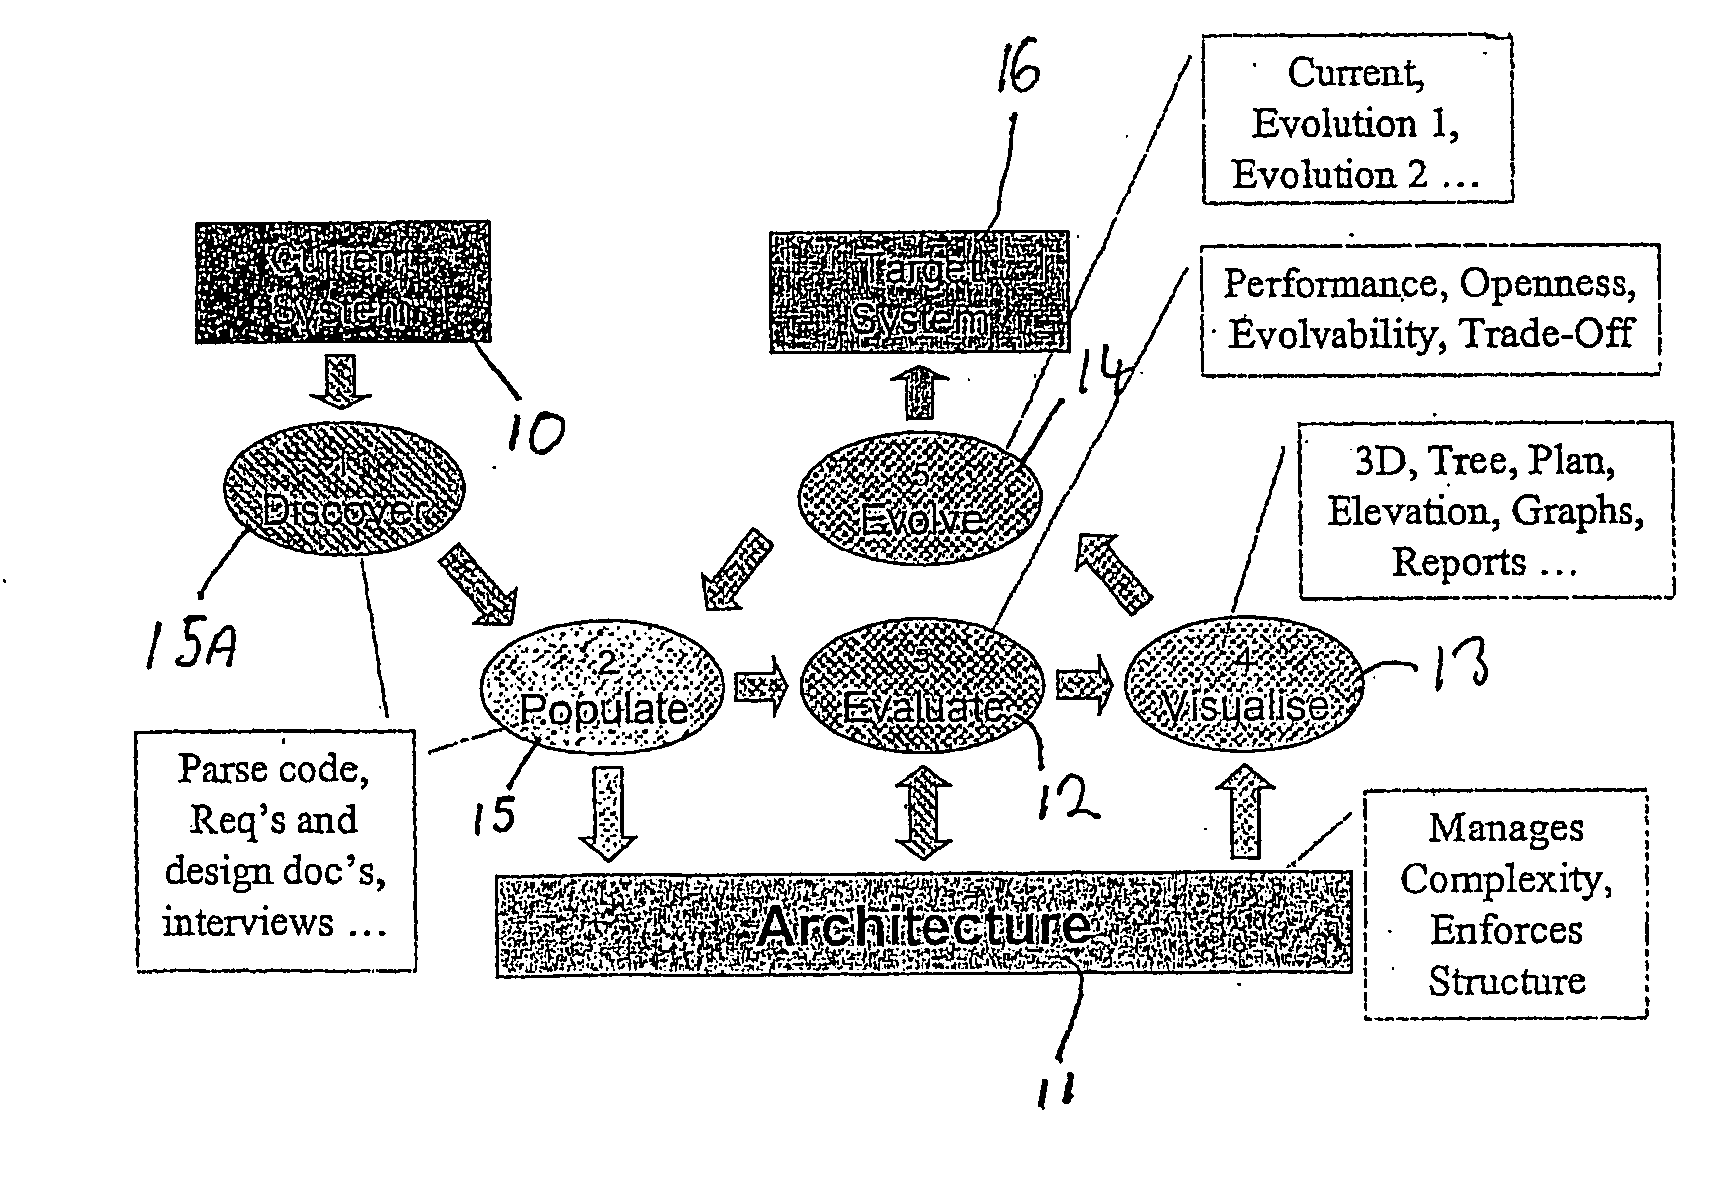 Method and apparatus for the analysis of complex systems